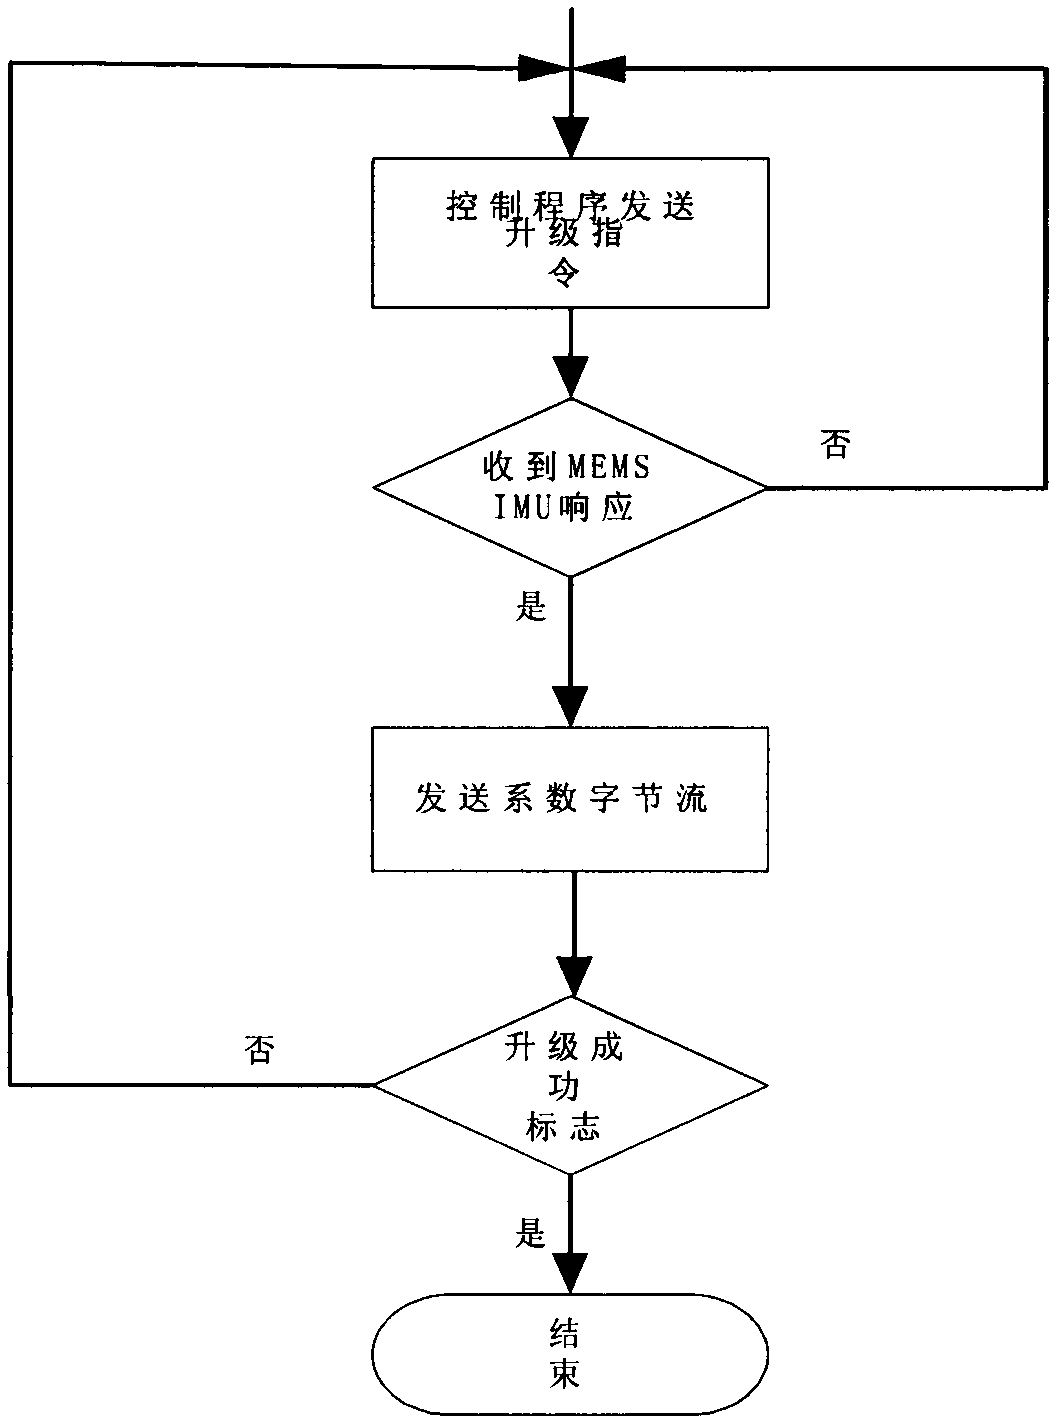 Method suitable for MEMS IMU repeated multiple calibrating